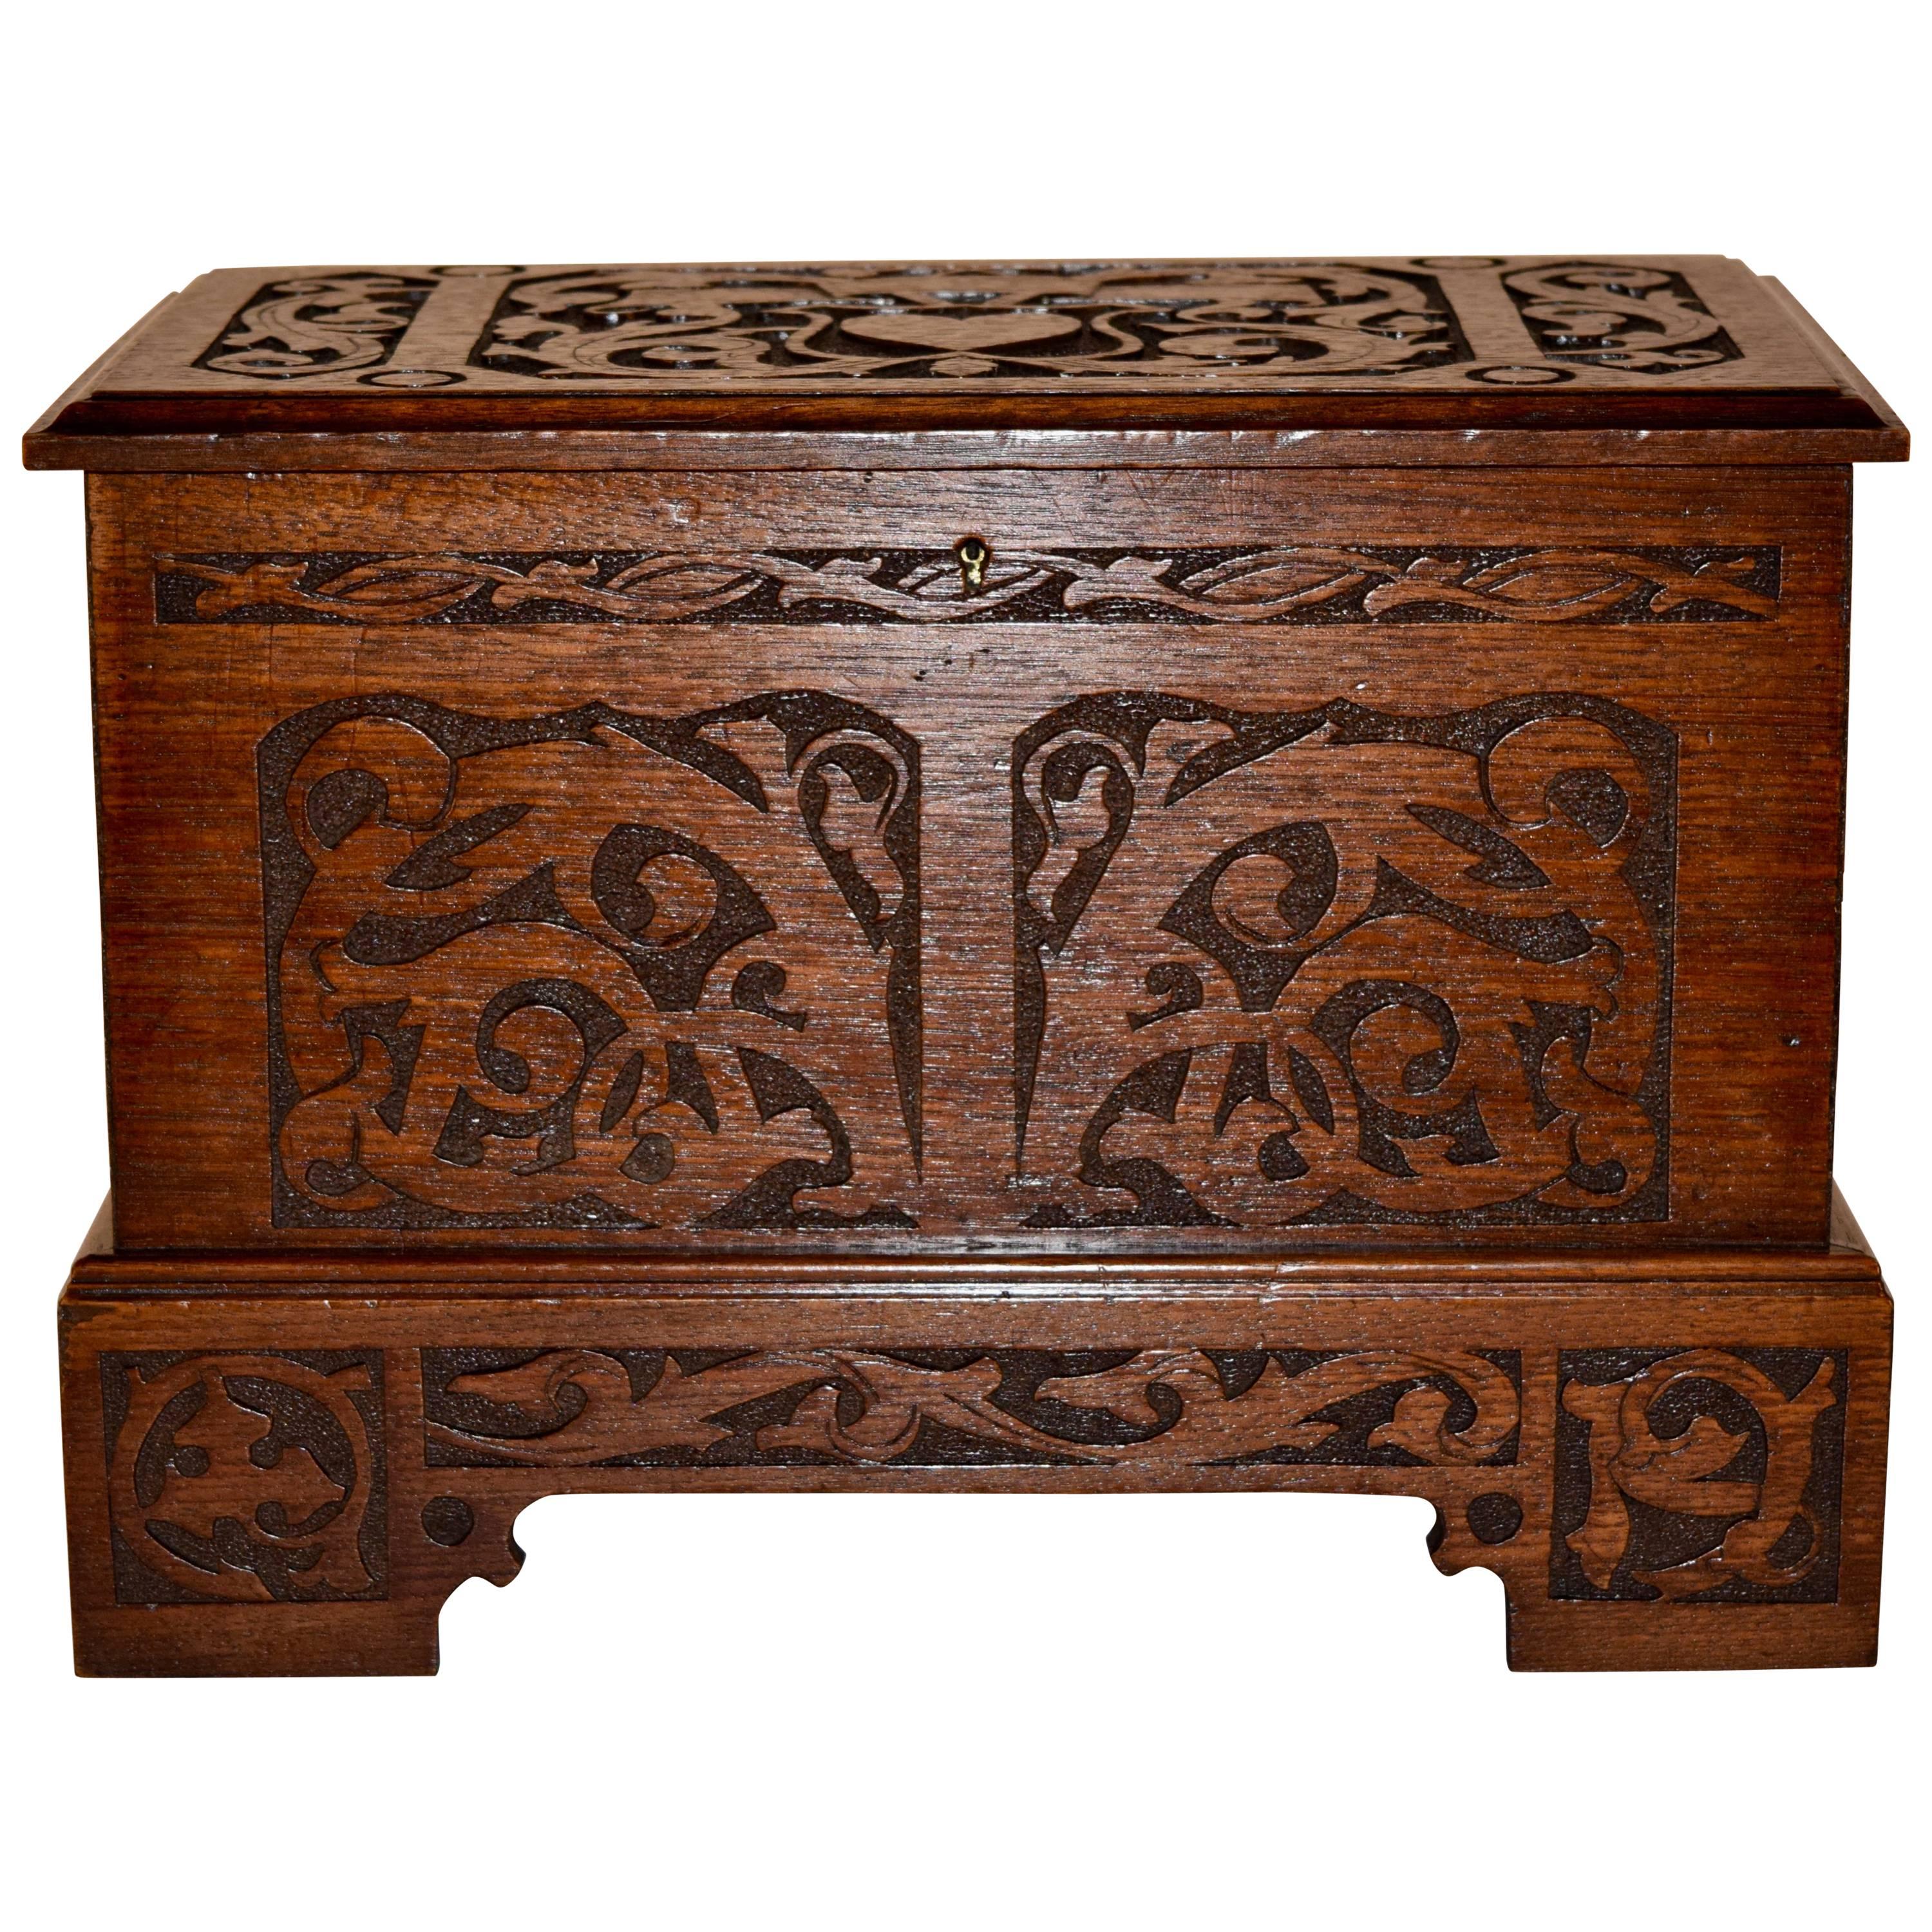 Late 19th Century Miniature Blanket Chest